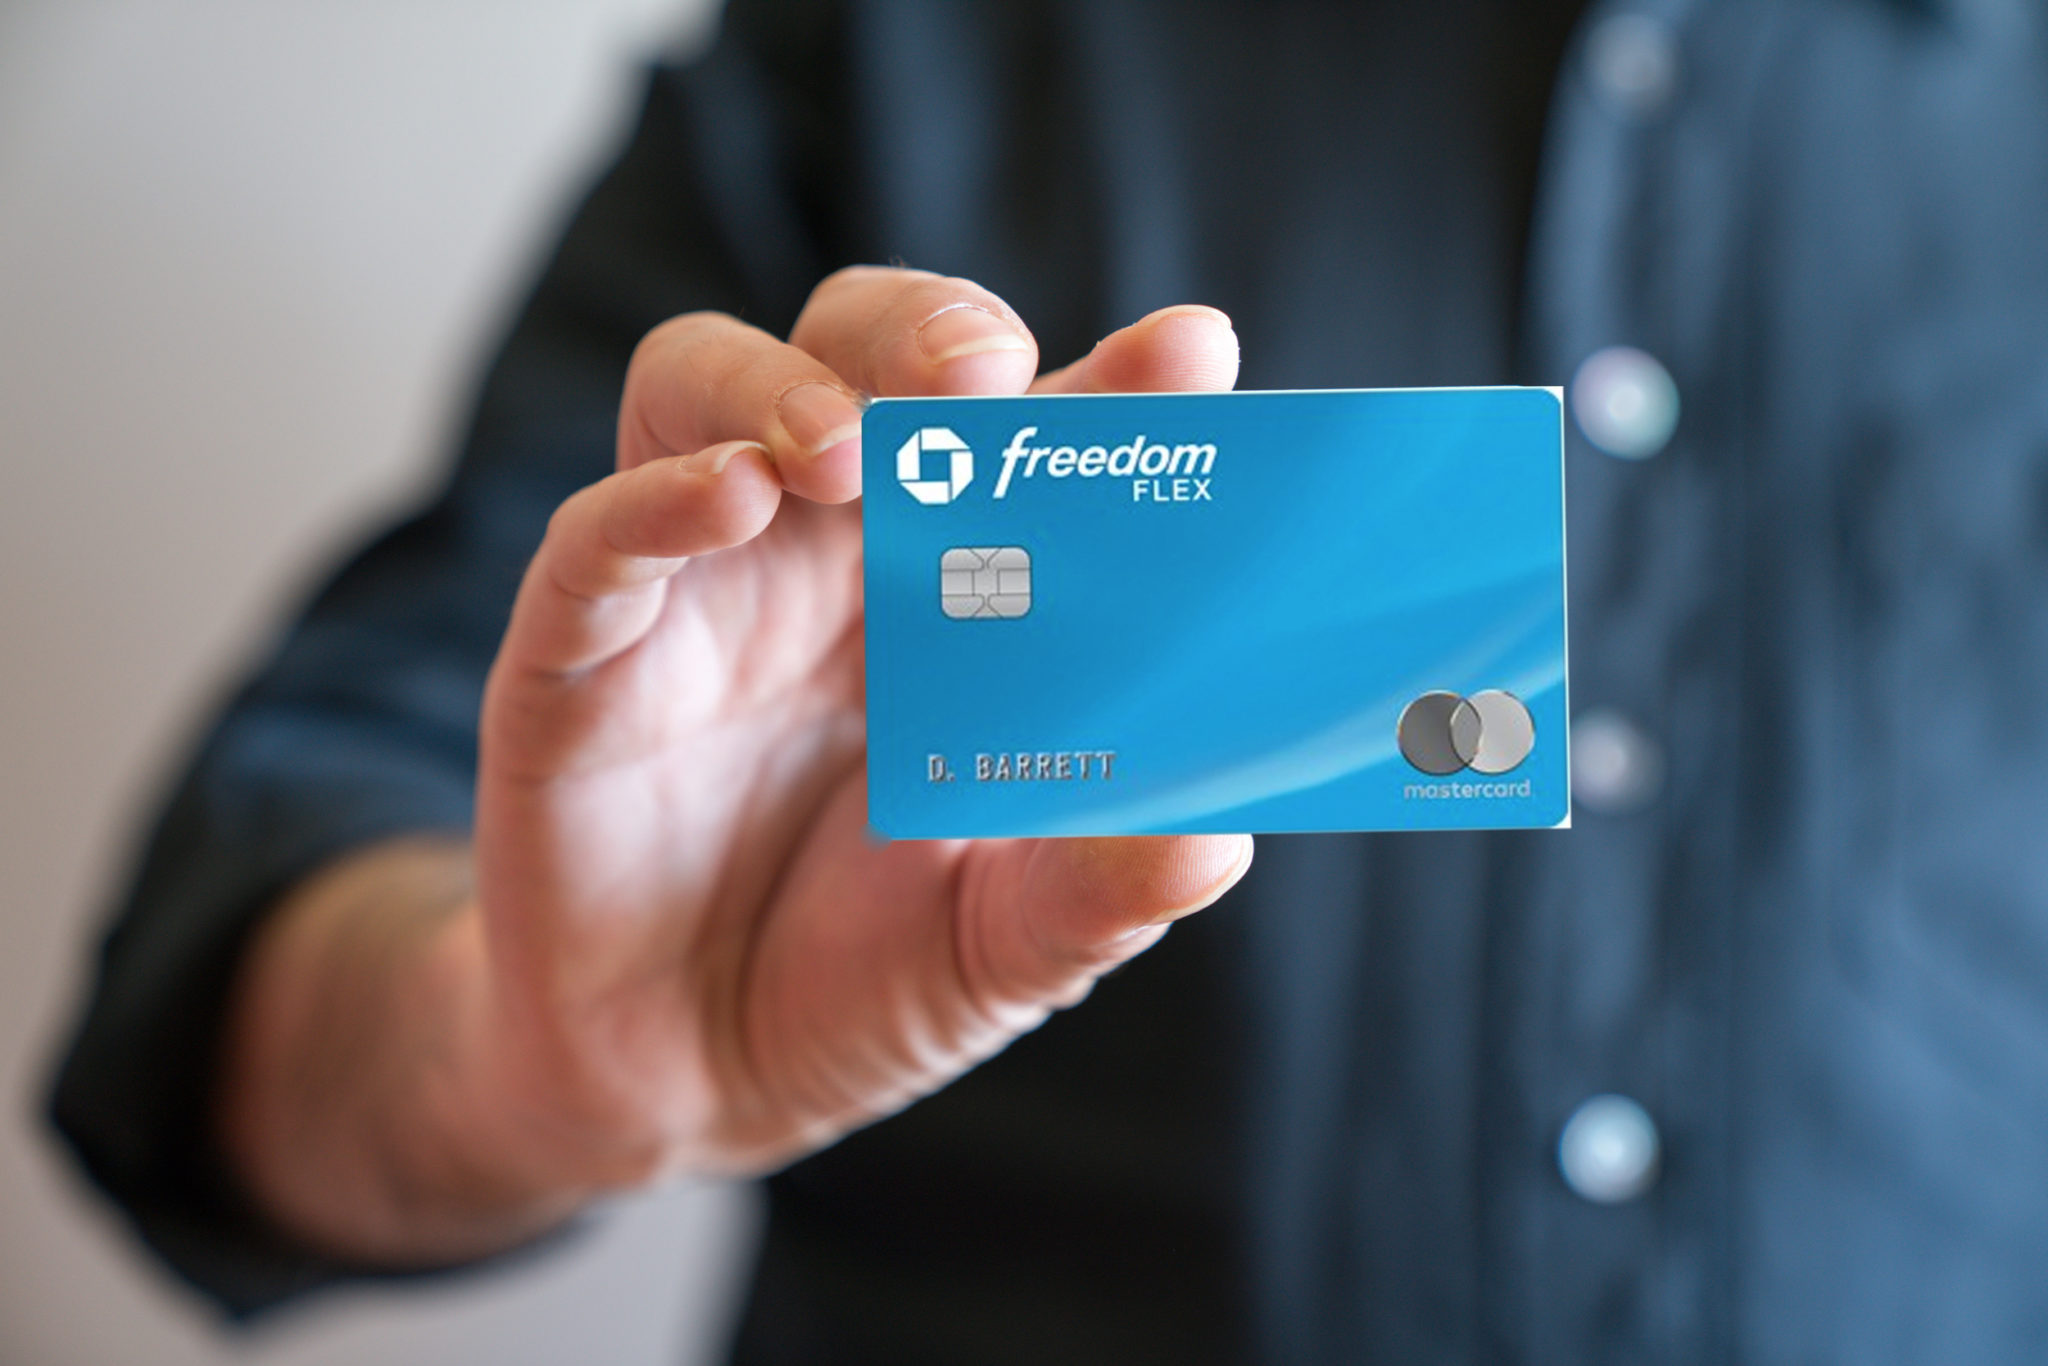 chase-announces-new-freedom-flex-product-boasts-ultimate-no-fee-credit-cards-eye-of-the-flyer